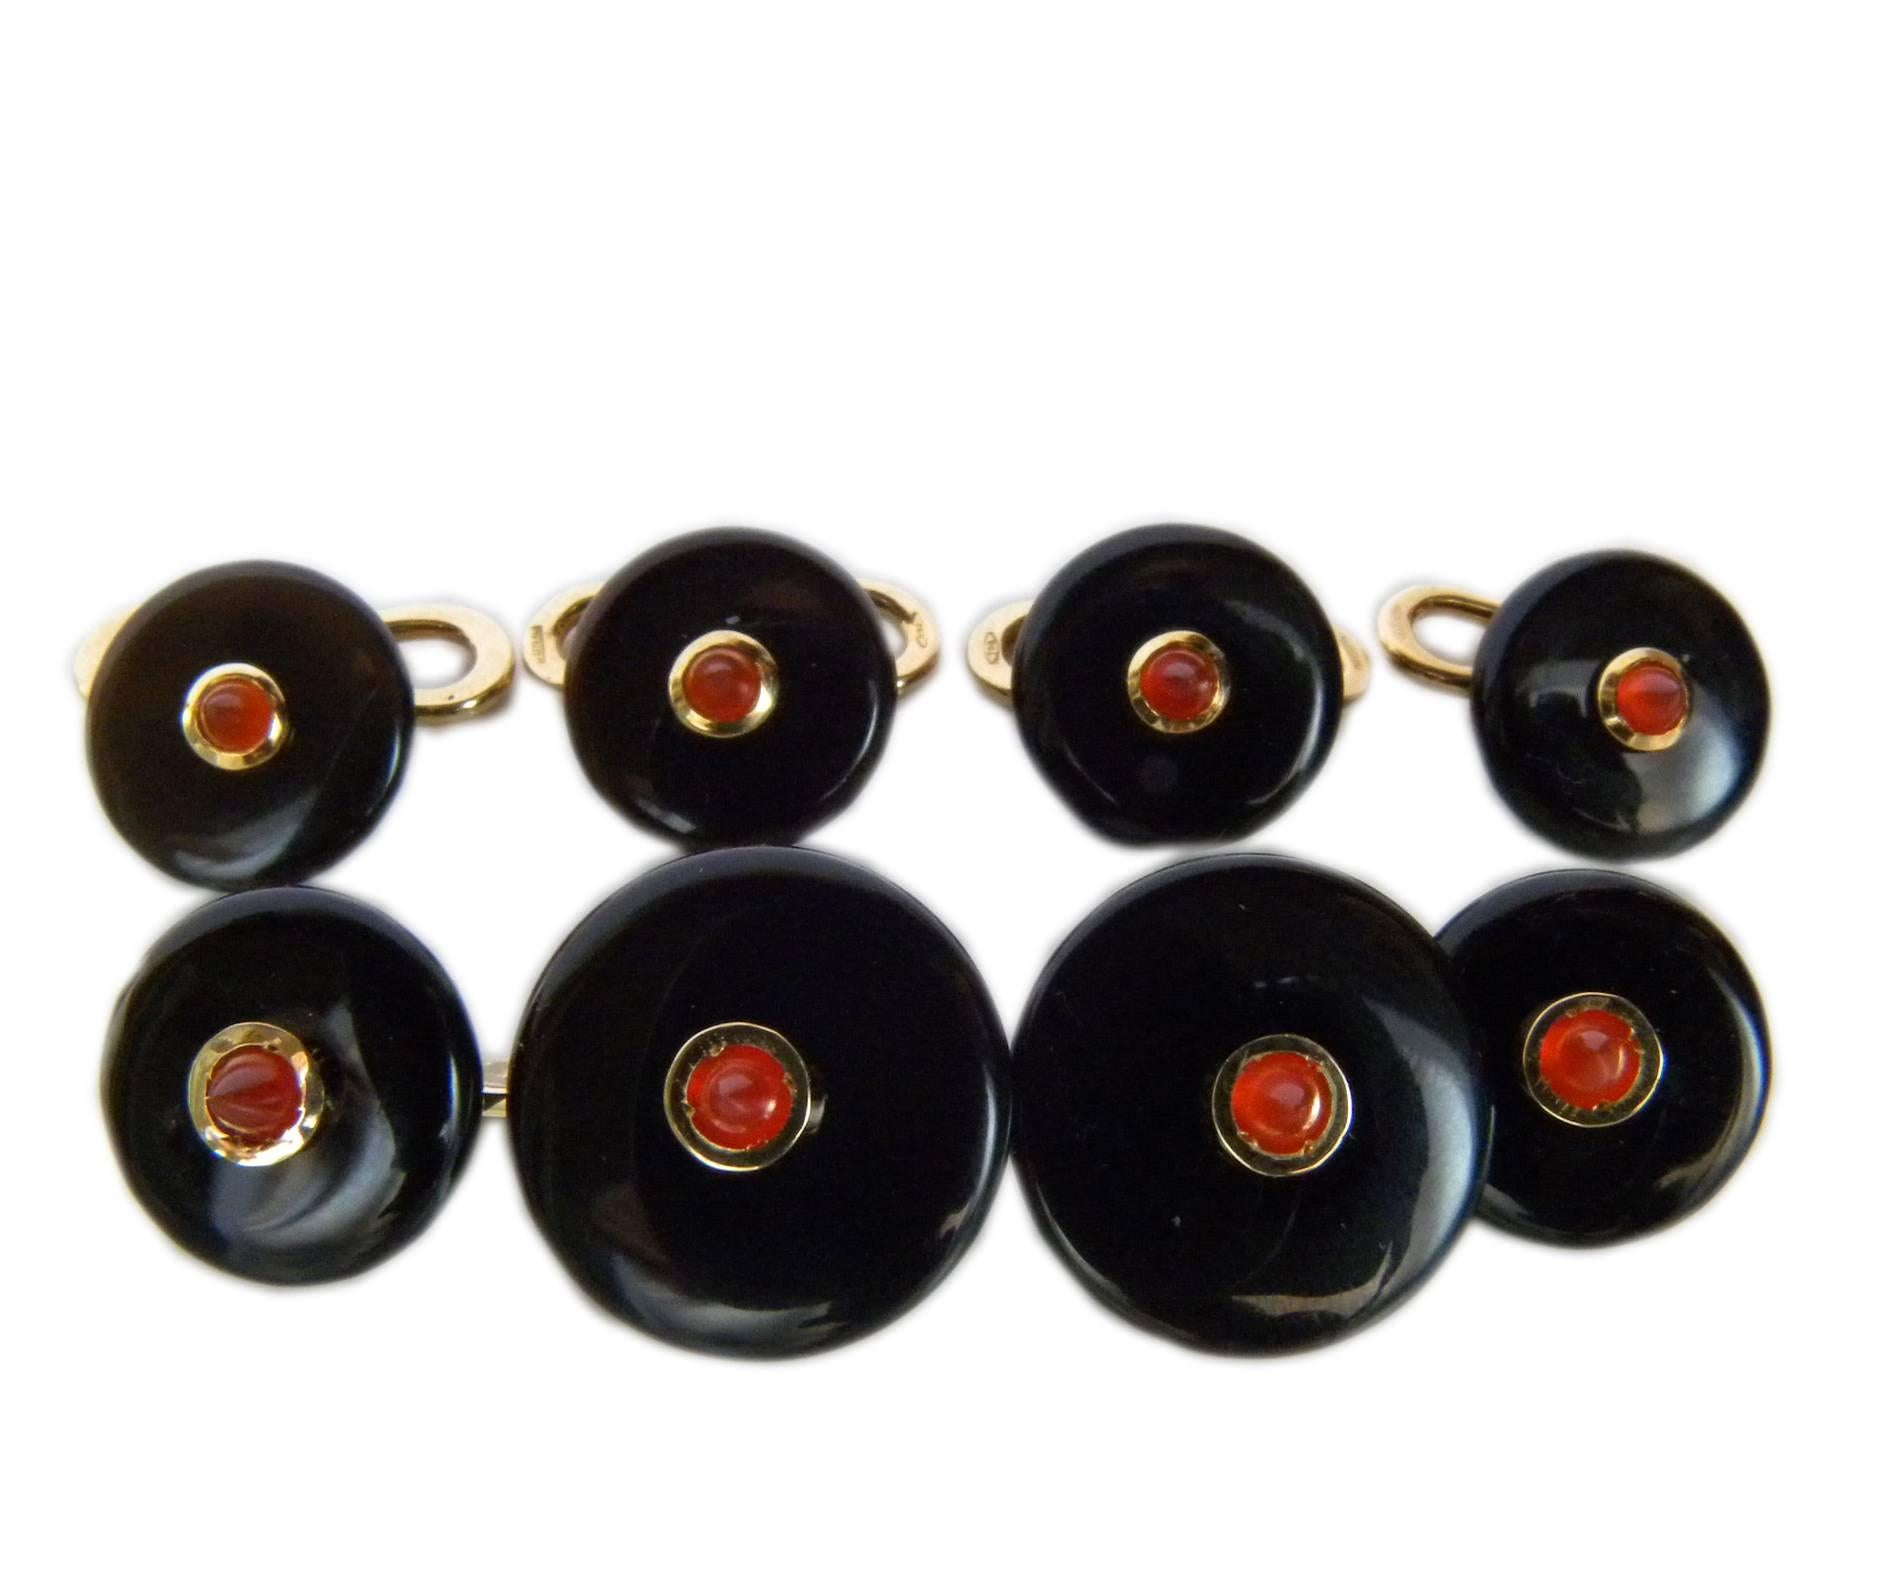 Smart, chic yet timeless 4 stud and cufflinks set combining the vivid red of carnelian cabochon with elegant hand inlaid black round onyx disks, all set in precious 18kt yellow gold.
In our smart black box and pouch.